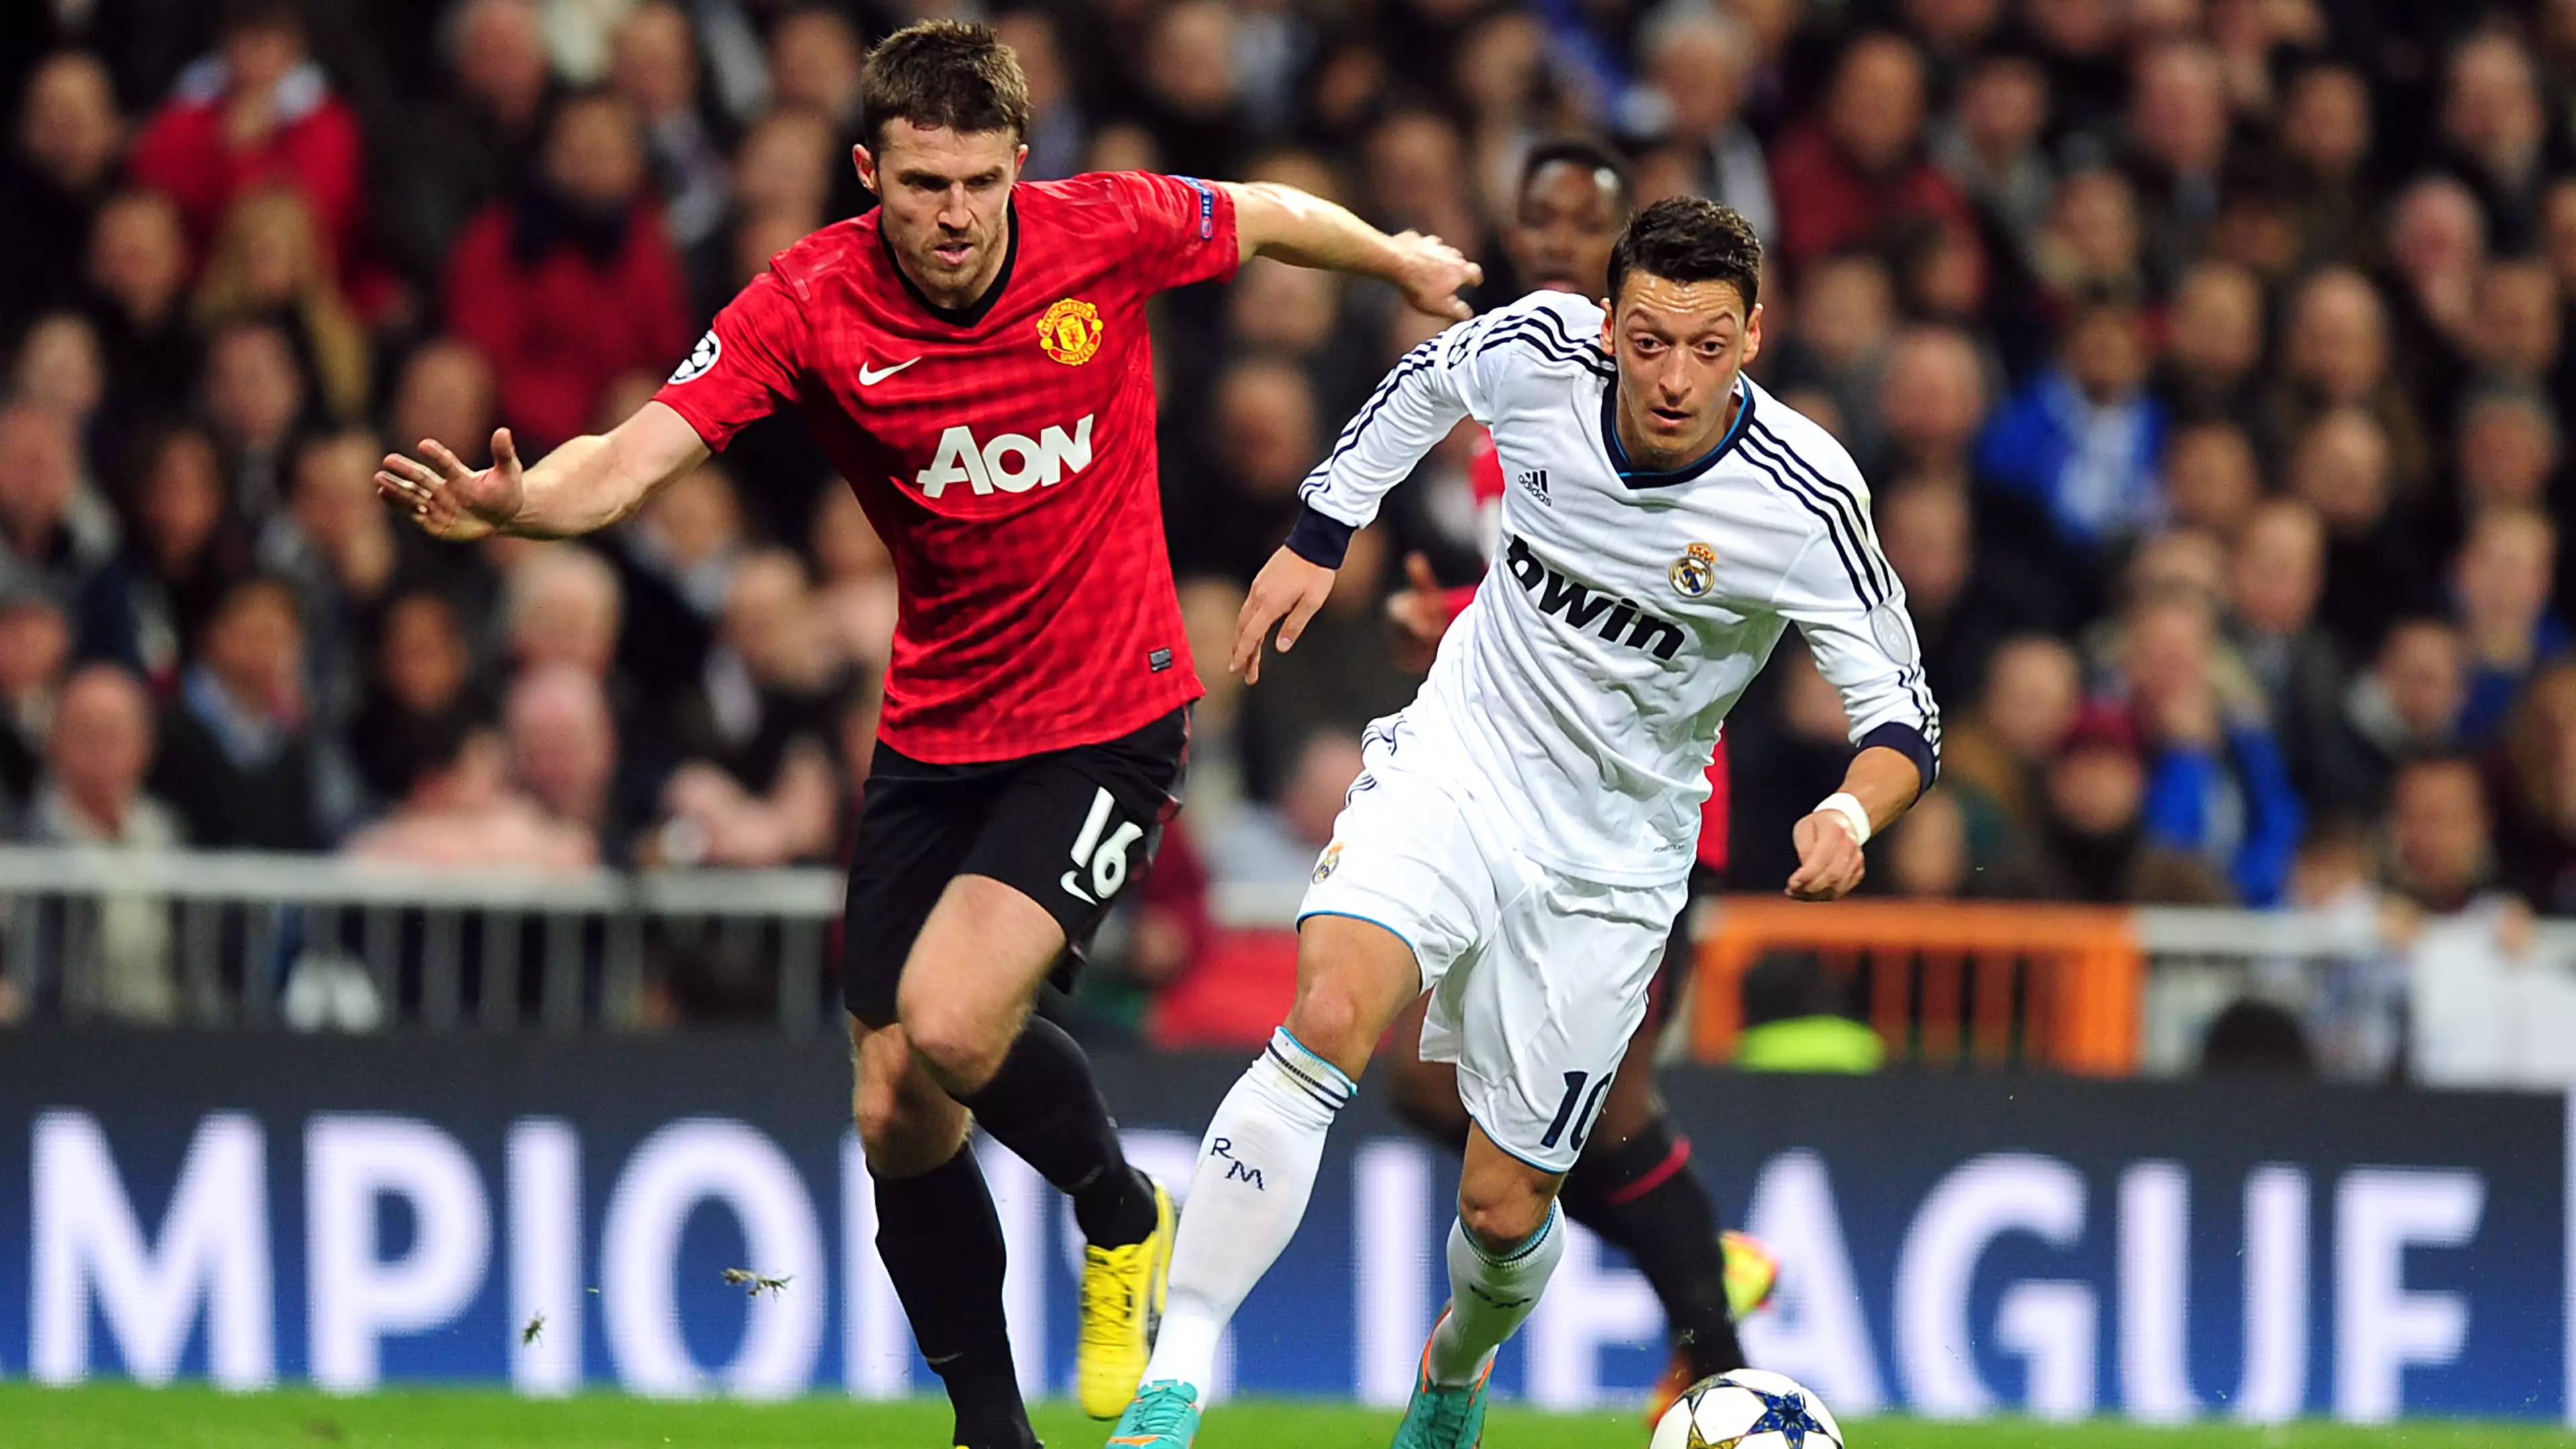 Michael Carrick Received A Bizarre Phone Call Before Huge Champions League Game